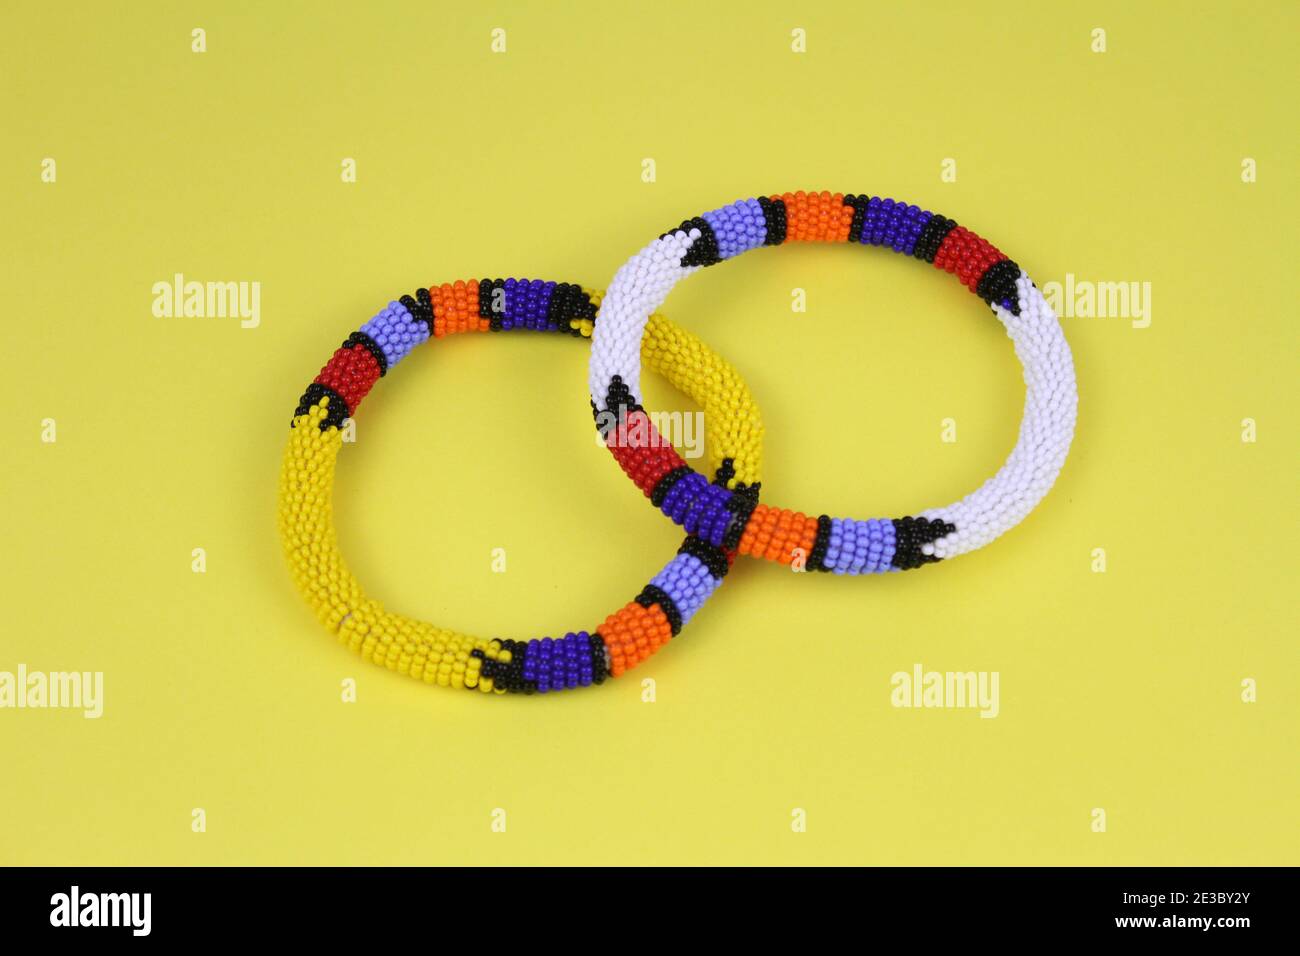 Colourful African beaded bangles against a bright yellow background. Stock Photo